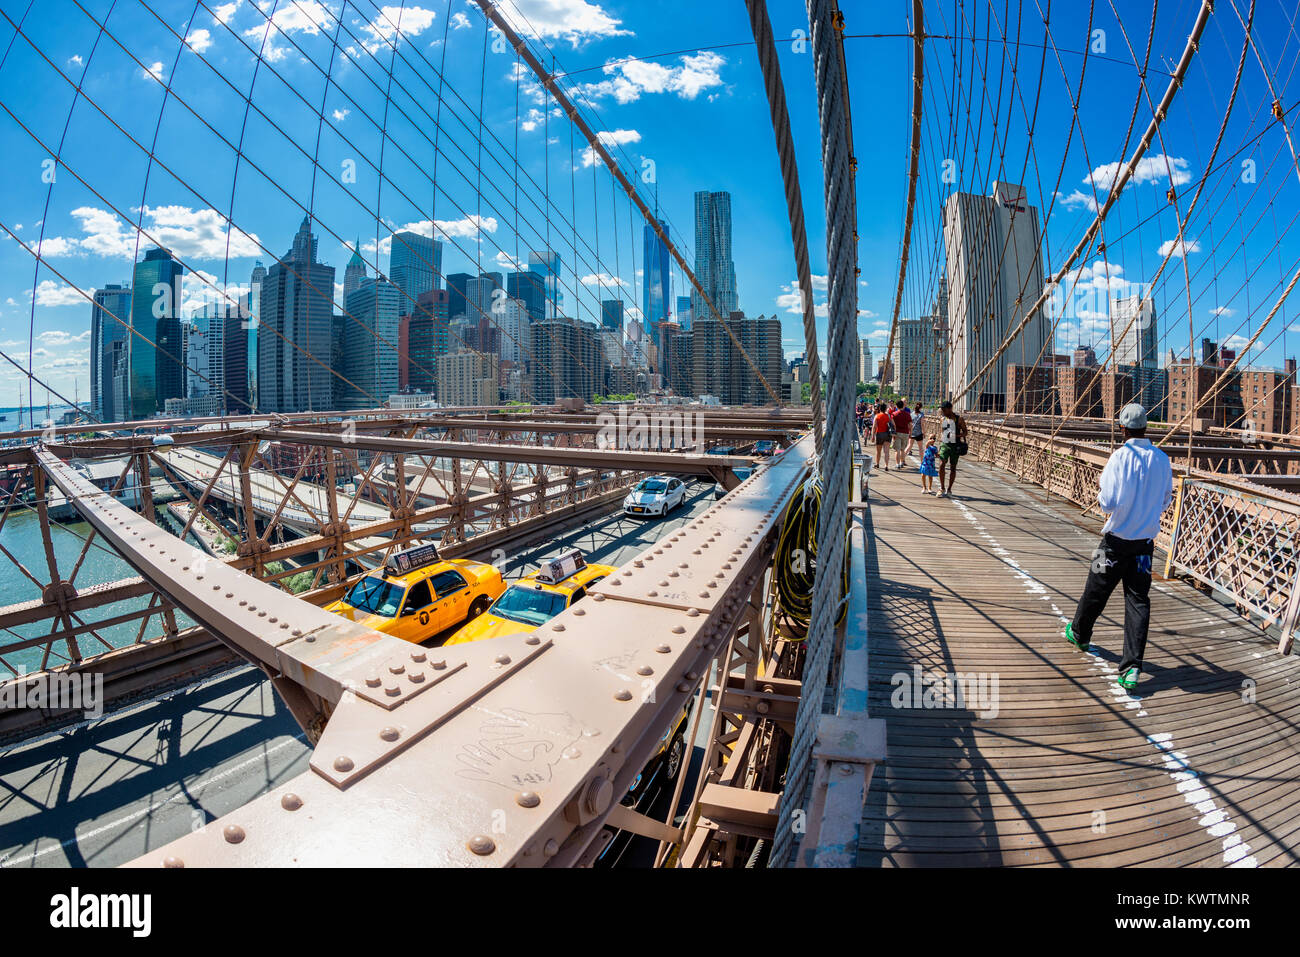 Fisheye view on the famous Brooklyn Bridge, New York City, USA. The Brooklyn Bridge is one of the oldest roadway bridges in the United States. Stock Photo